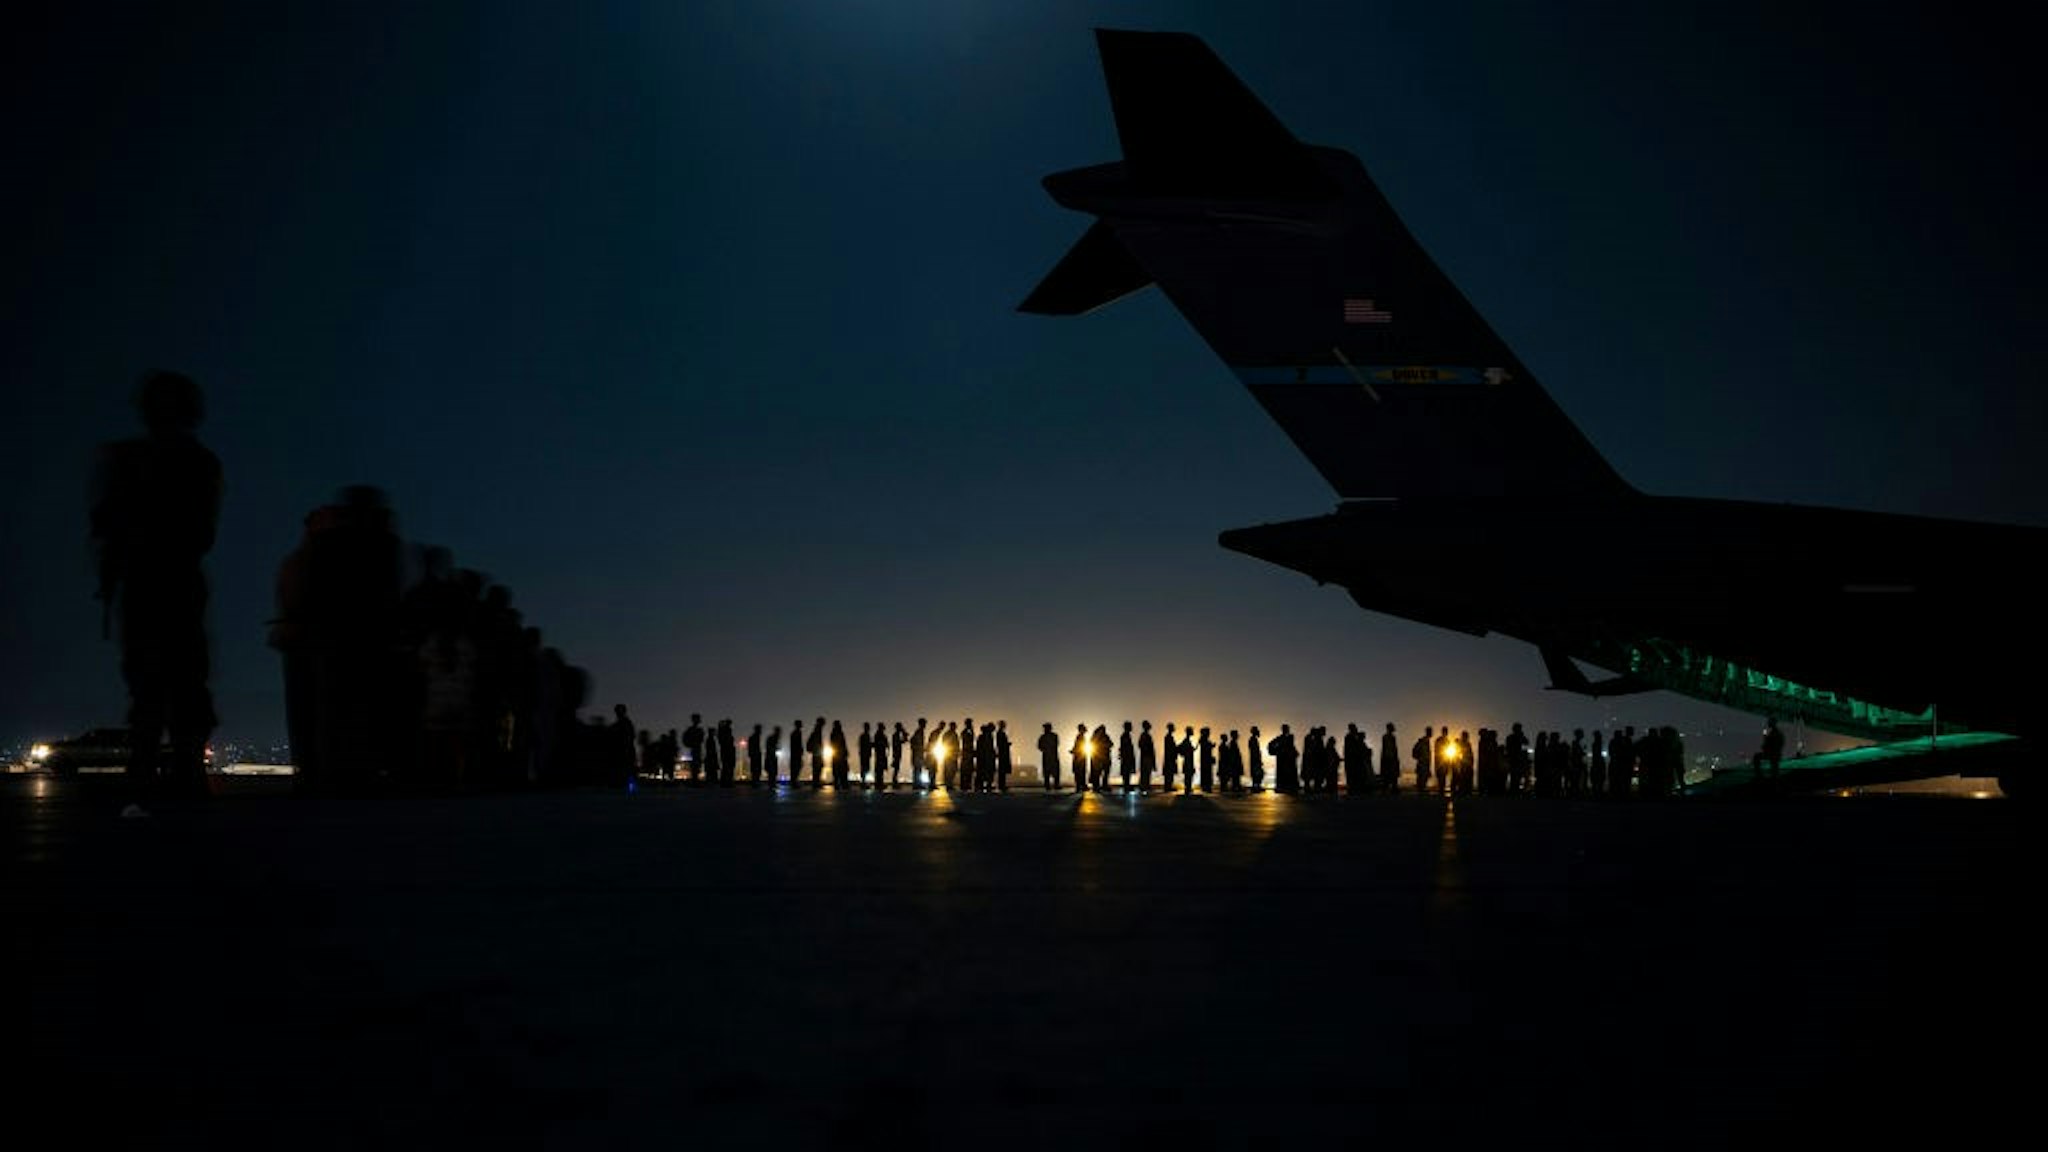 KABUL, AFGHANISTAN - AUGUST 21: In this handout provided by the U.S. Air Force, an air crew prepares to load evacuees aboard a C-17 Globemaster III aircraft in support of the Afghanistan evacuation at Hamid Karzai International Airport on August 21, 2021 in Kabul, Afghanistan. (Photo by